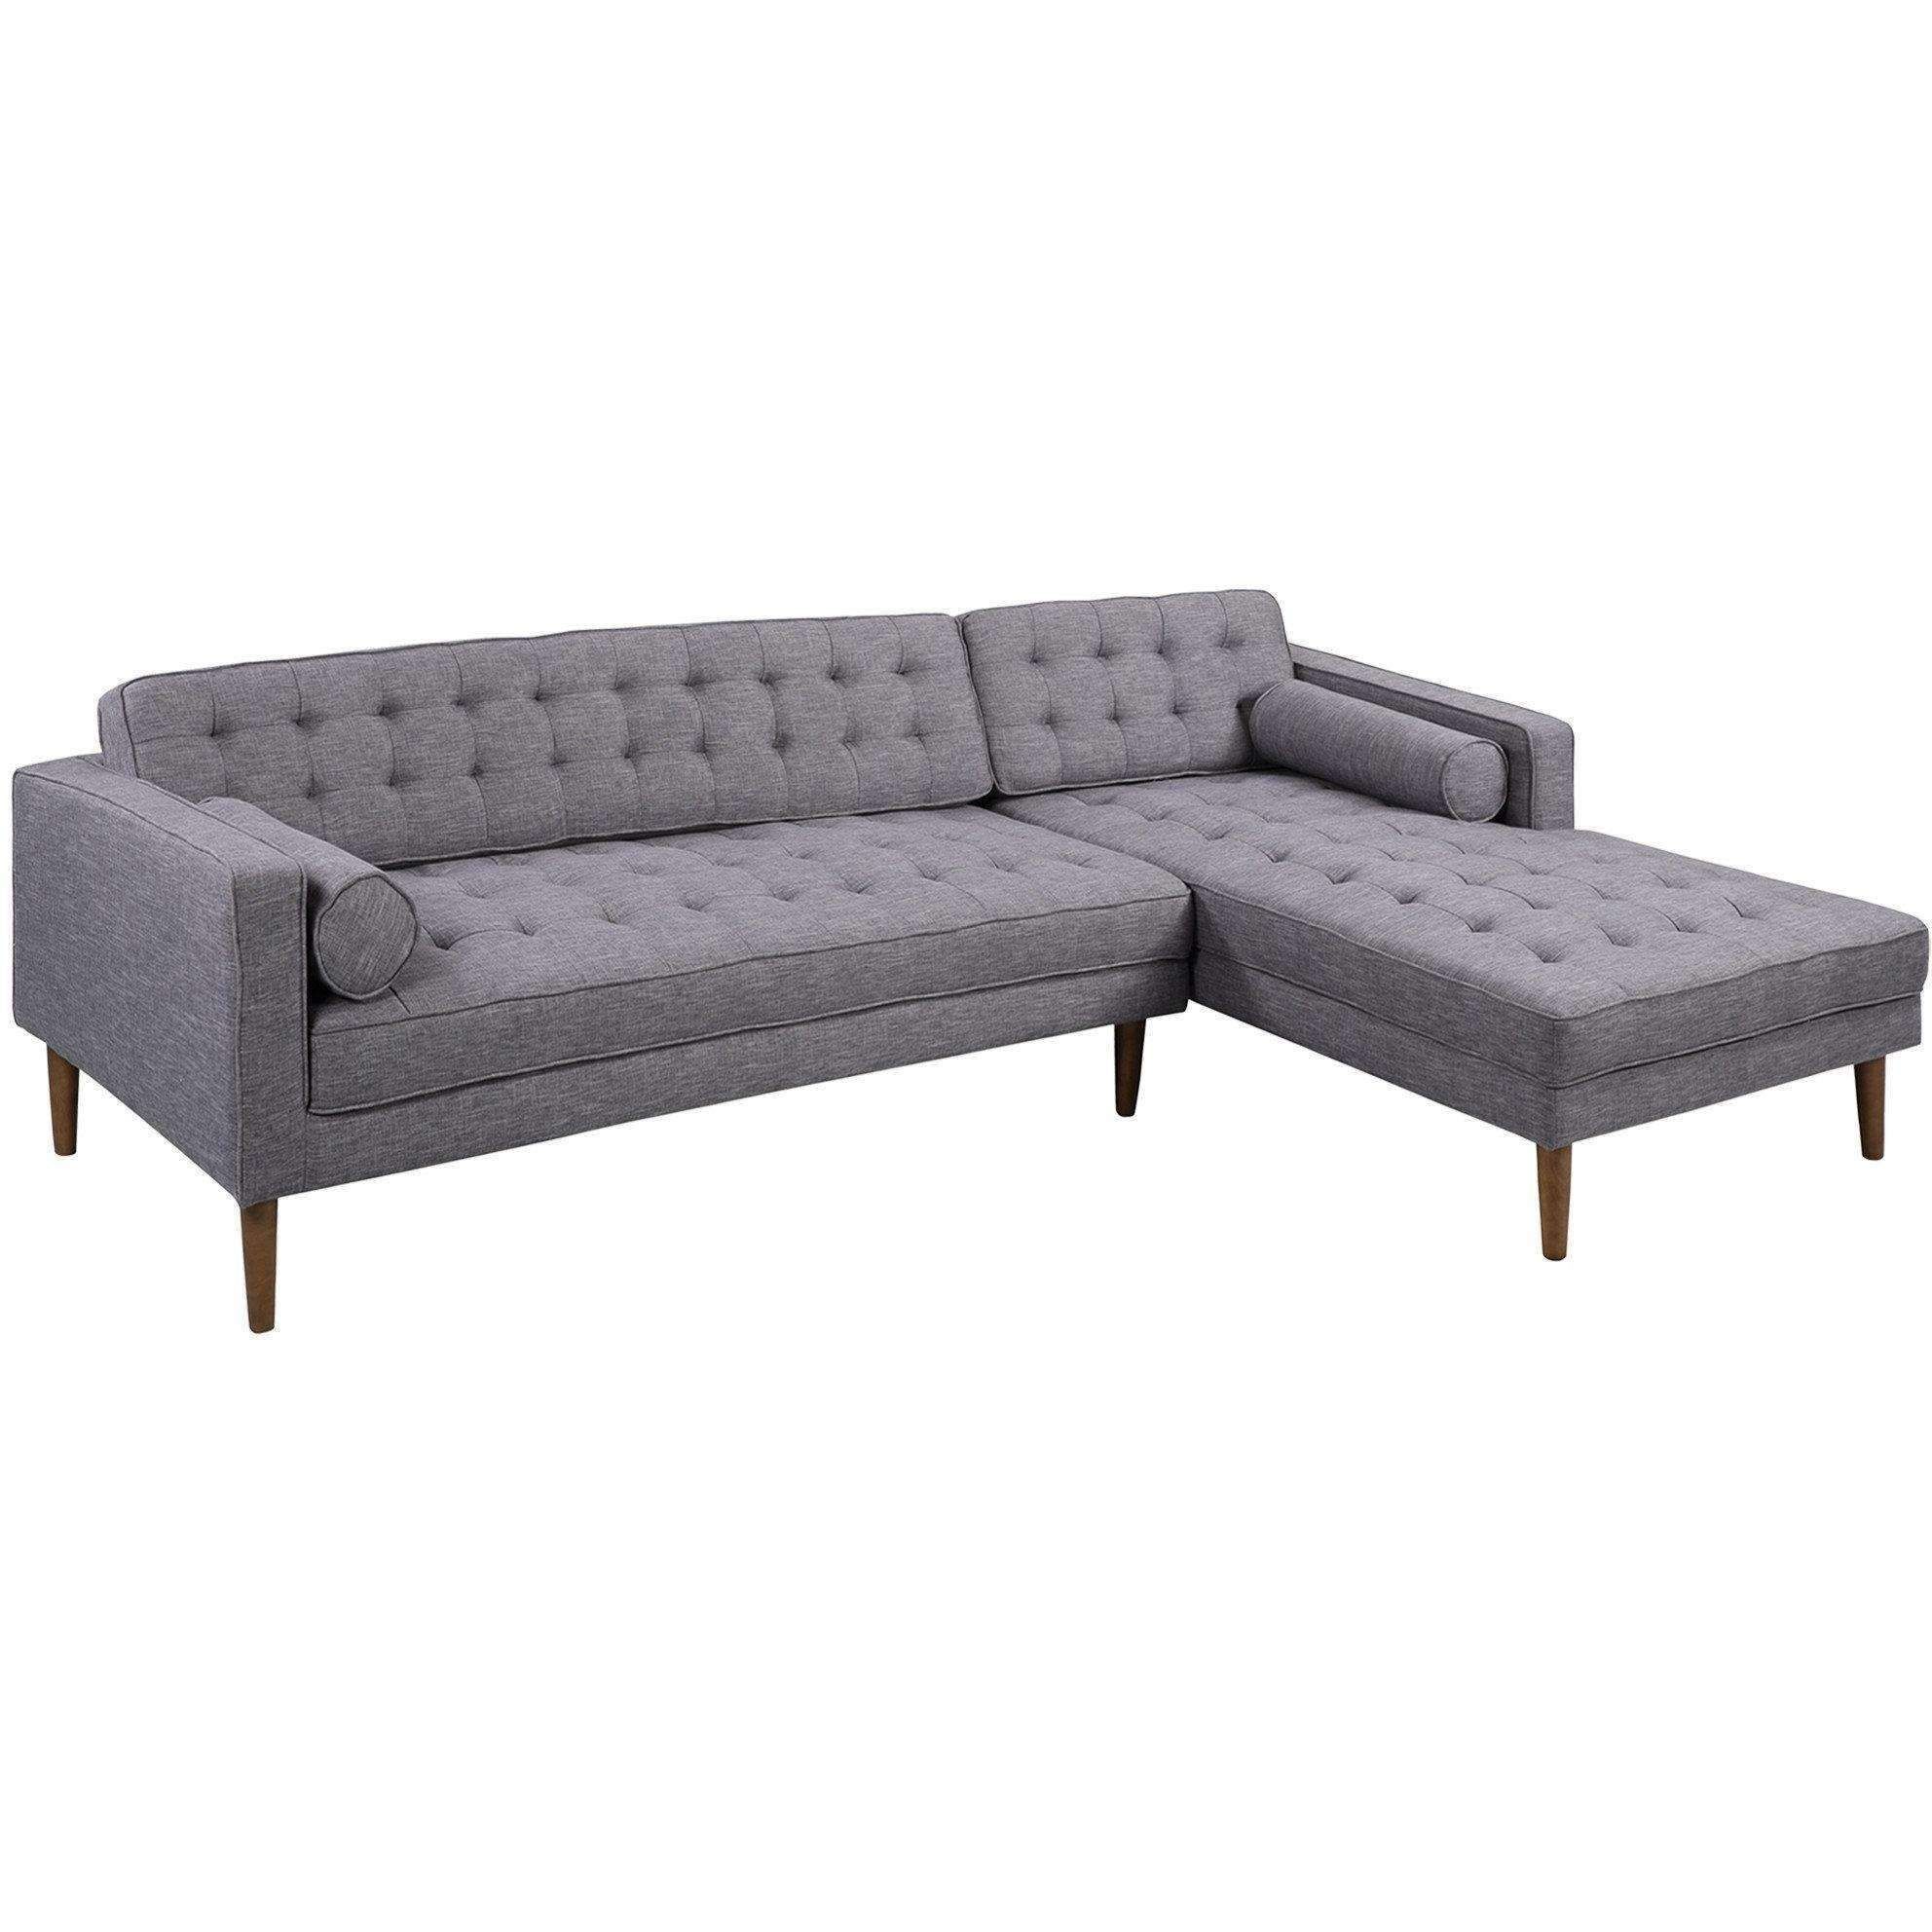 Armen Living Element Right Side Chaise Sectional In Dark In Element Right Side Chaise Sectional Sofas In Dark Gray Linen And Walnut Legs (View 1 of 15)